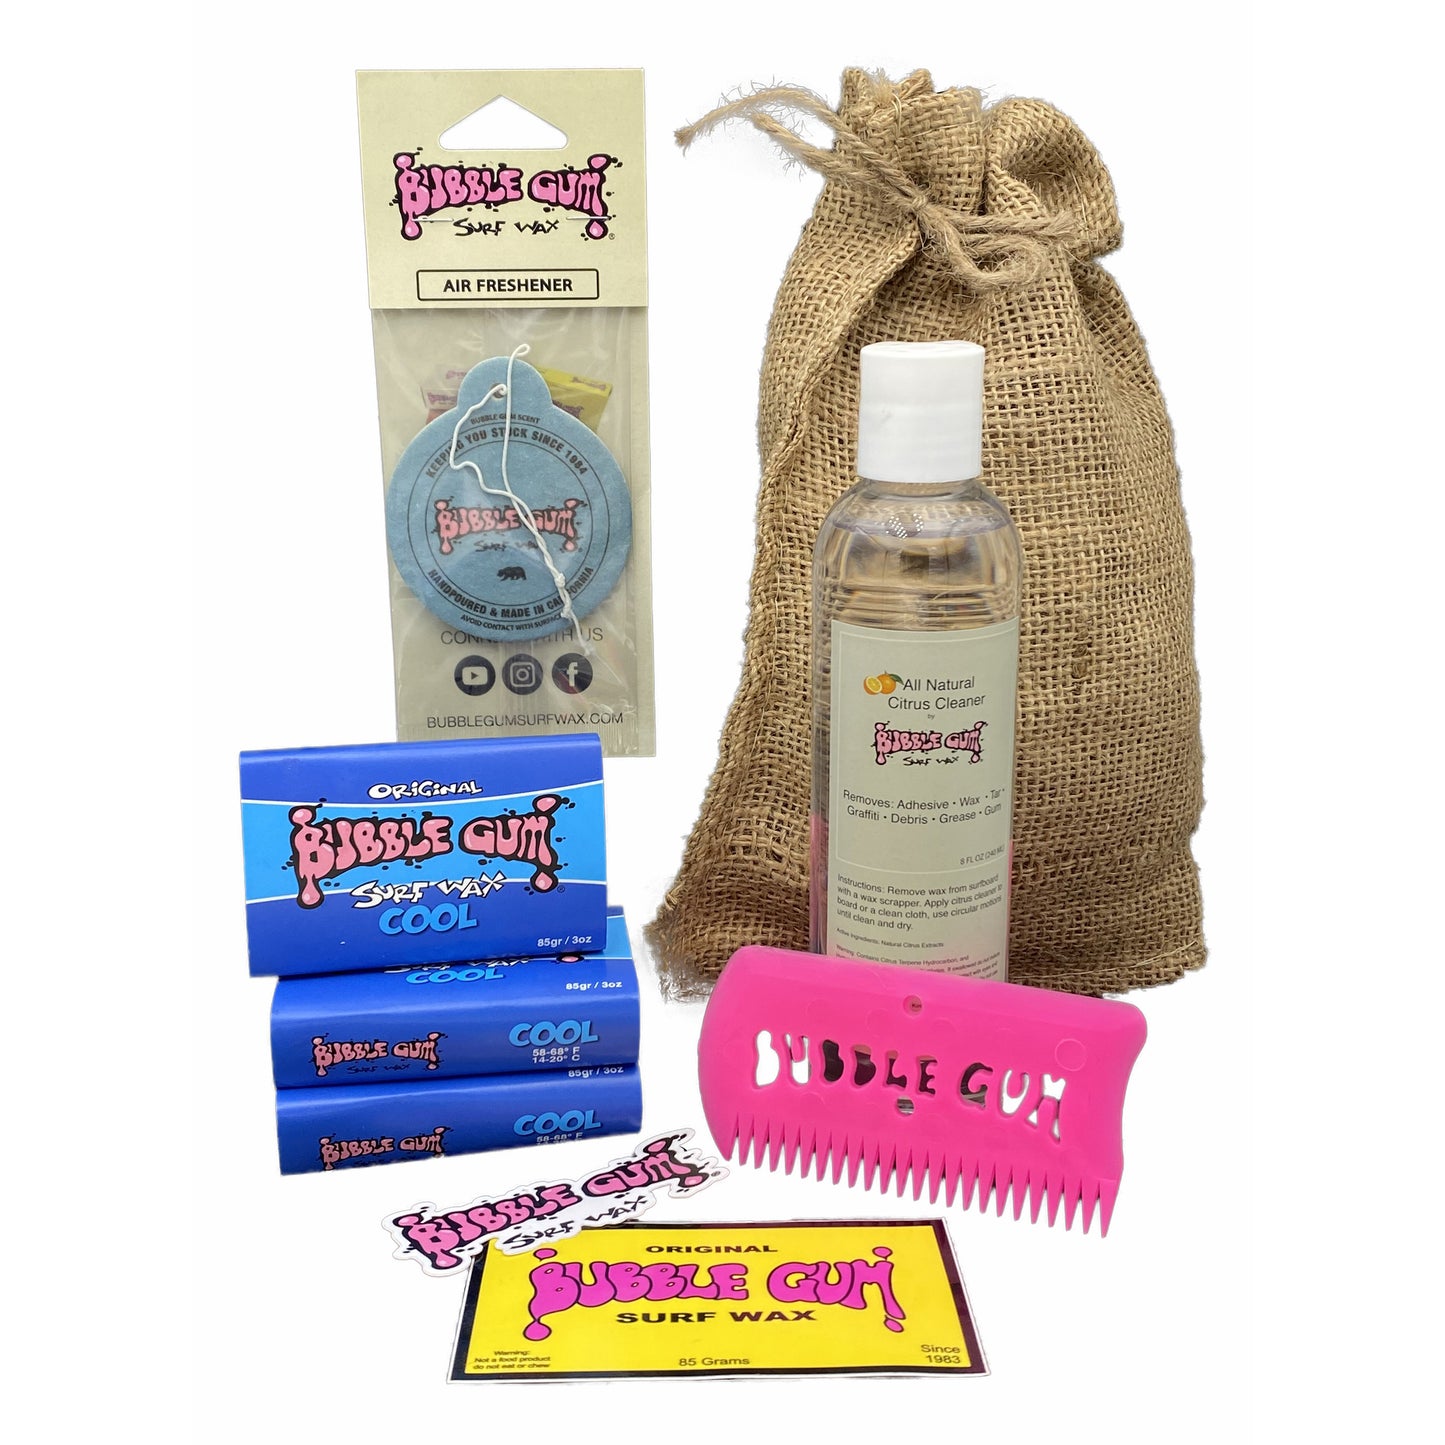 Holiday Bundle With surf wax, comb, stickers, air freshener, and remover